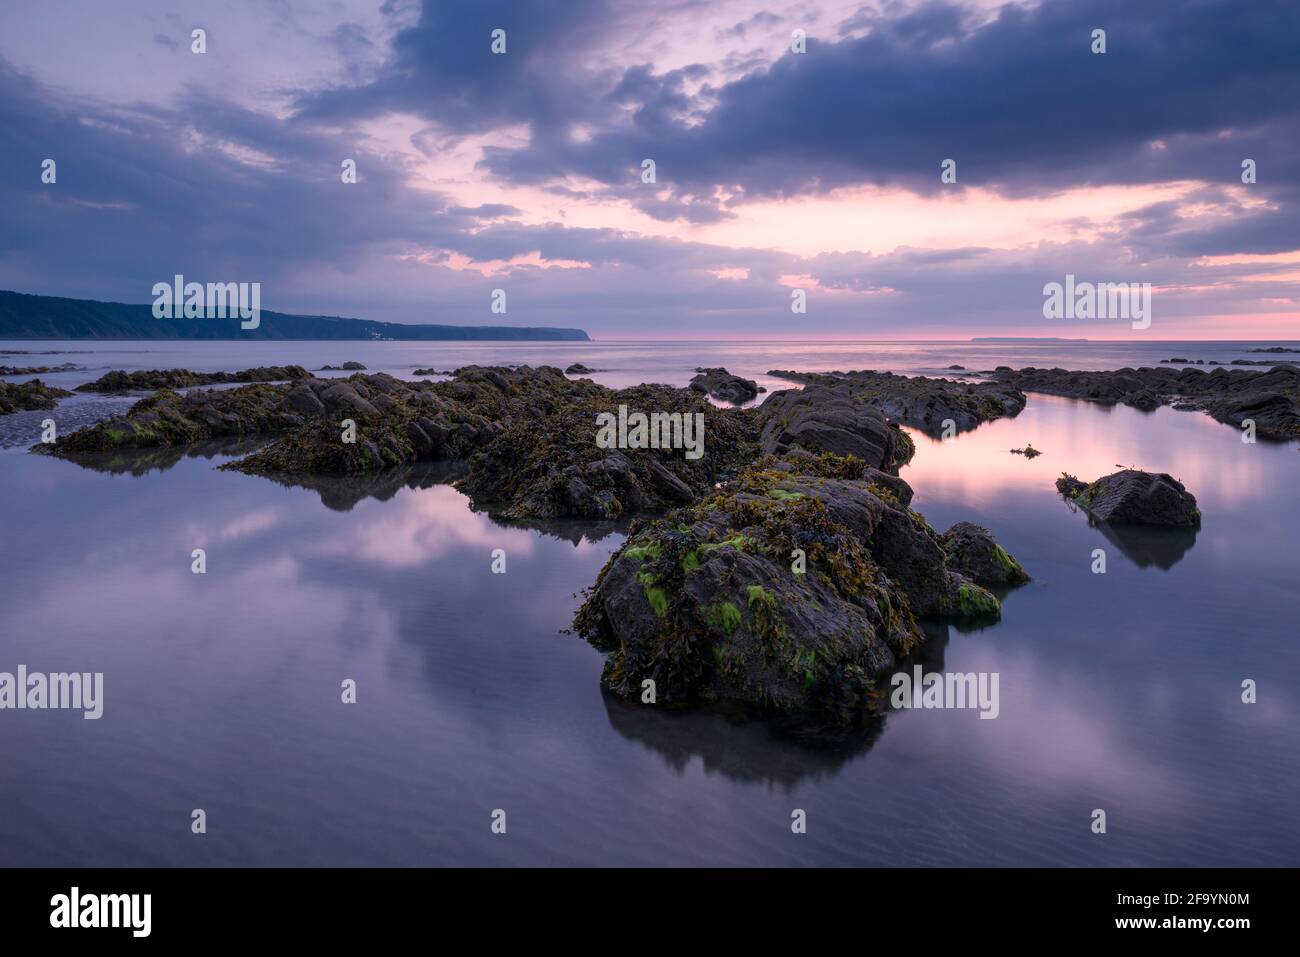 Peppercombe beach at dusk on the North Devon coast with Hartland point in the distance, England. Stock Photo